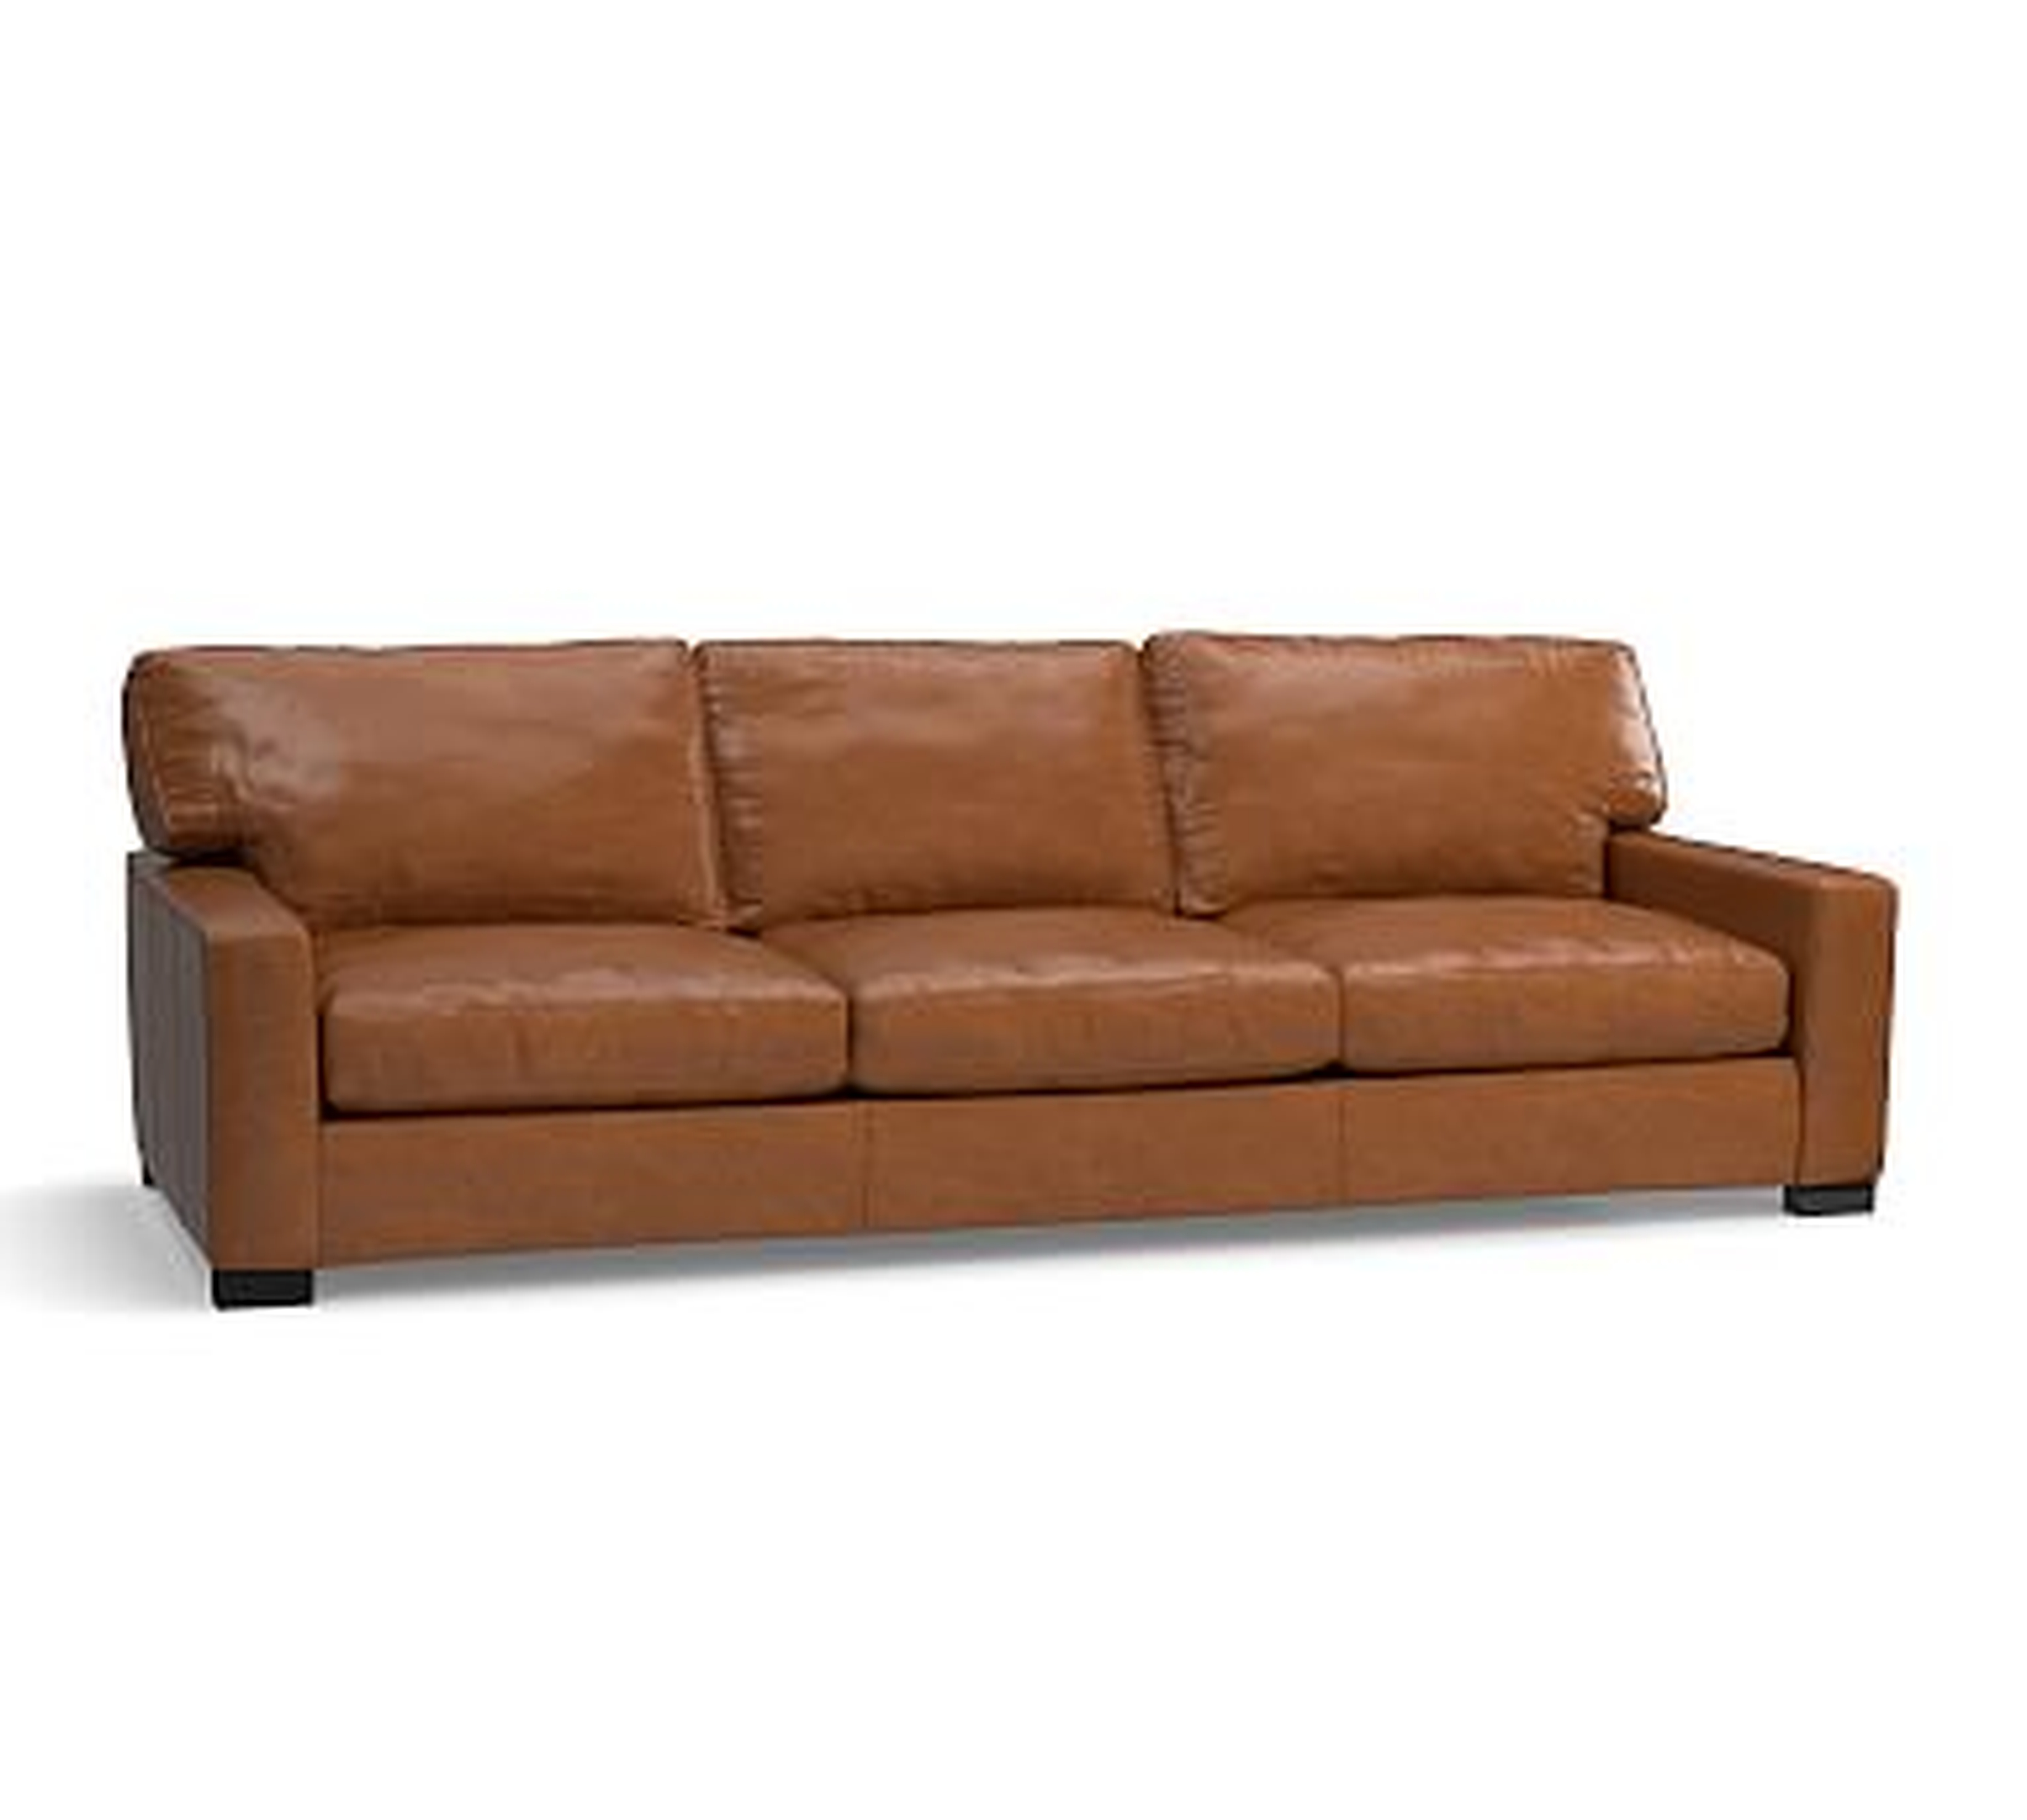 Turner Square Arm Leather Grand Sofa 103.5", Down Blend Wrapped Cushions, Vintage Caramel - Pottery Barn